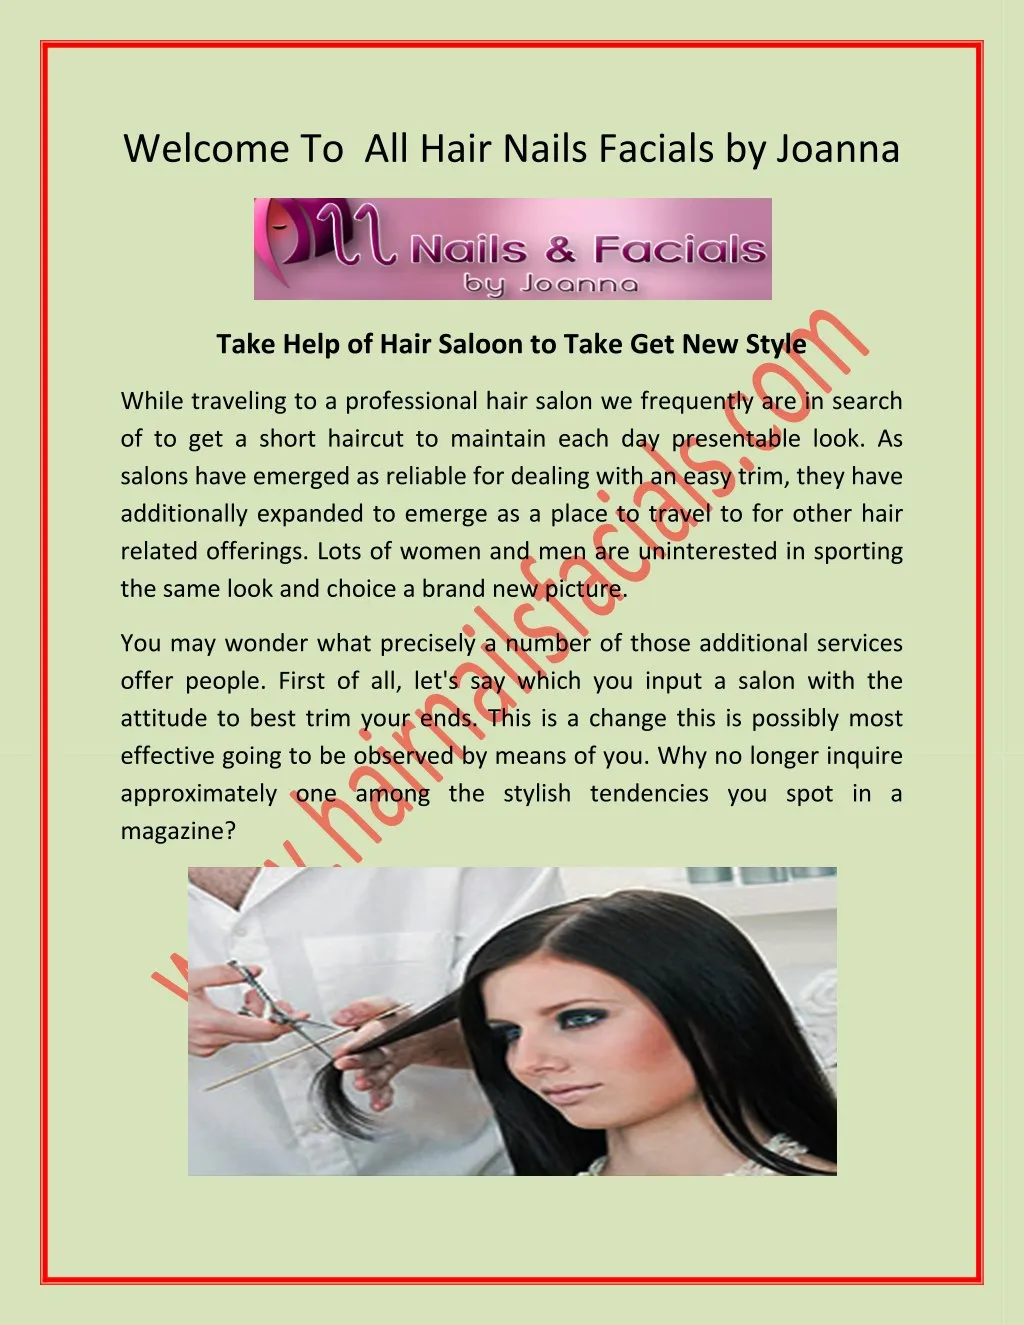 welcome to all hair nails facials by joanna